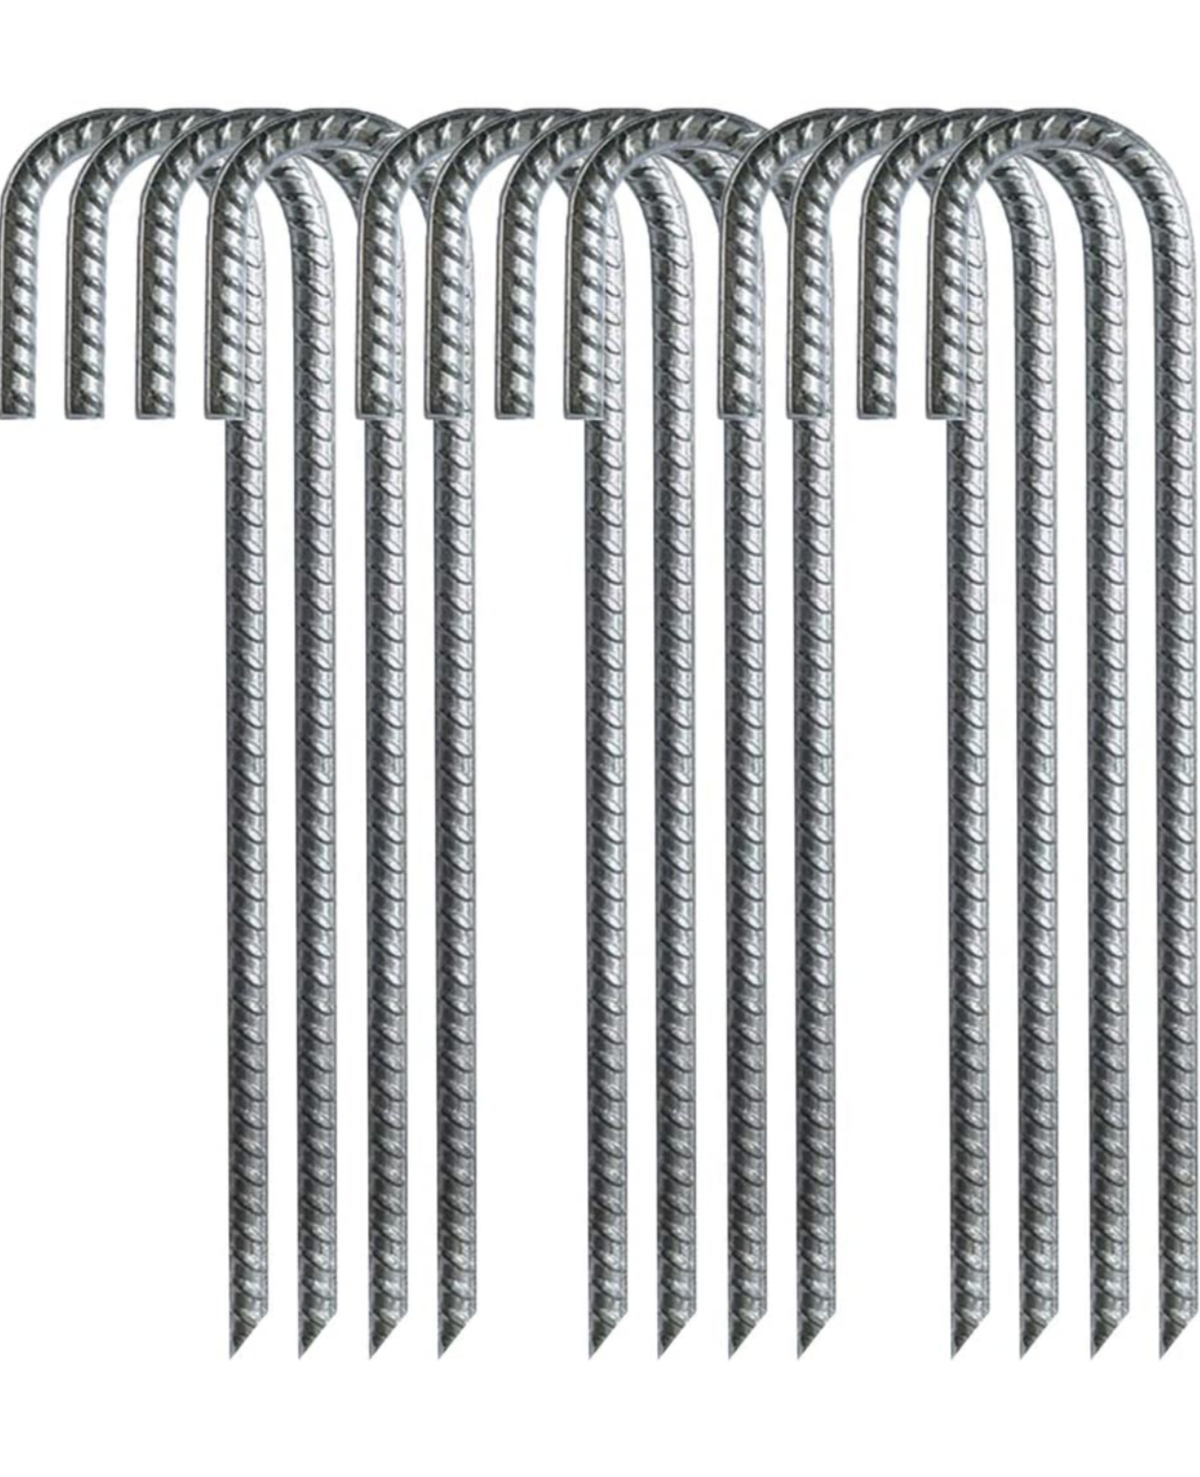 12 Pack Rebar Stakes, 12 Inch J Hook Heavy Duty Galvanized Ground Anchors for Secure Tent